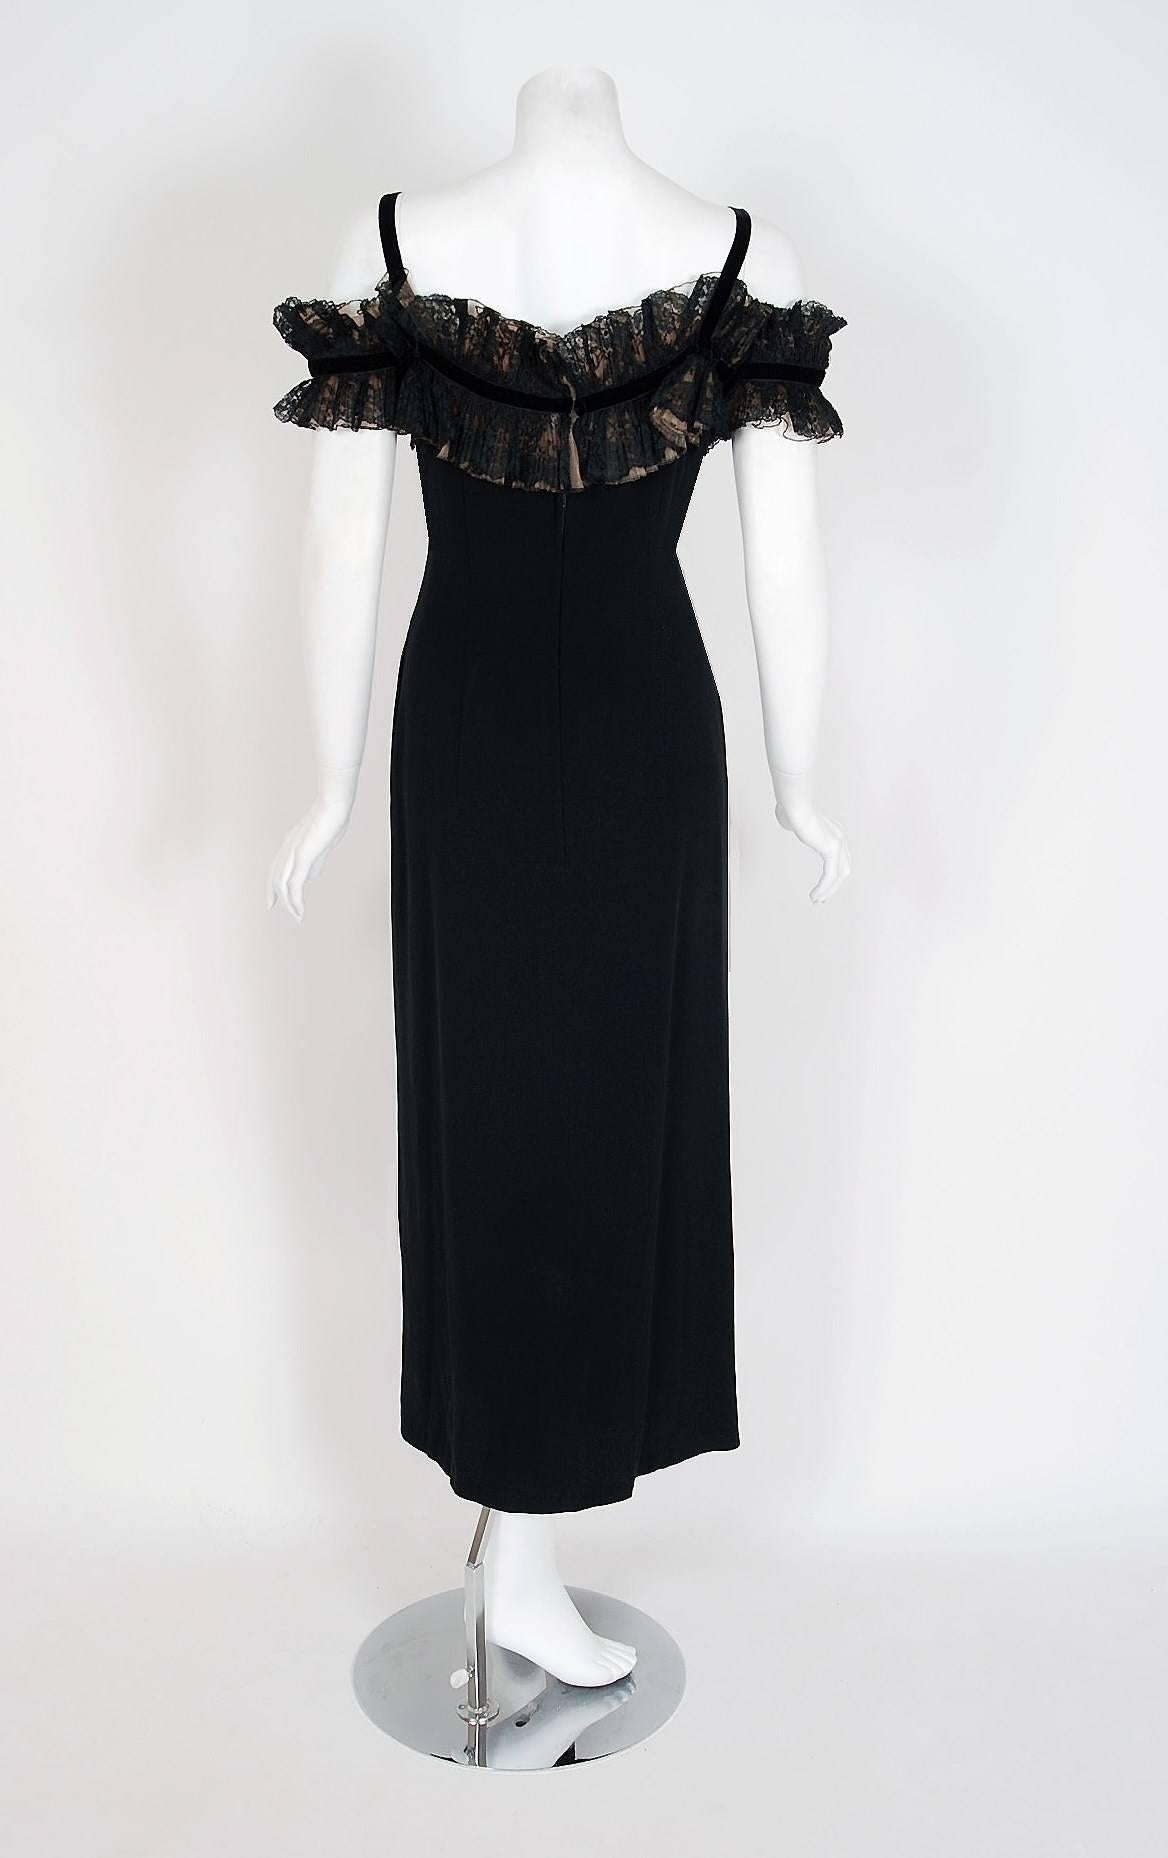 1950's Peggy Hunt Black Ruffle Off-Shoulder Illusion Crepe Evening Dress Gown 2